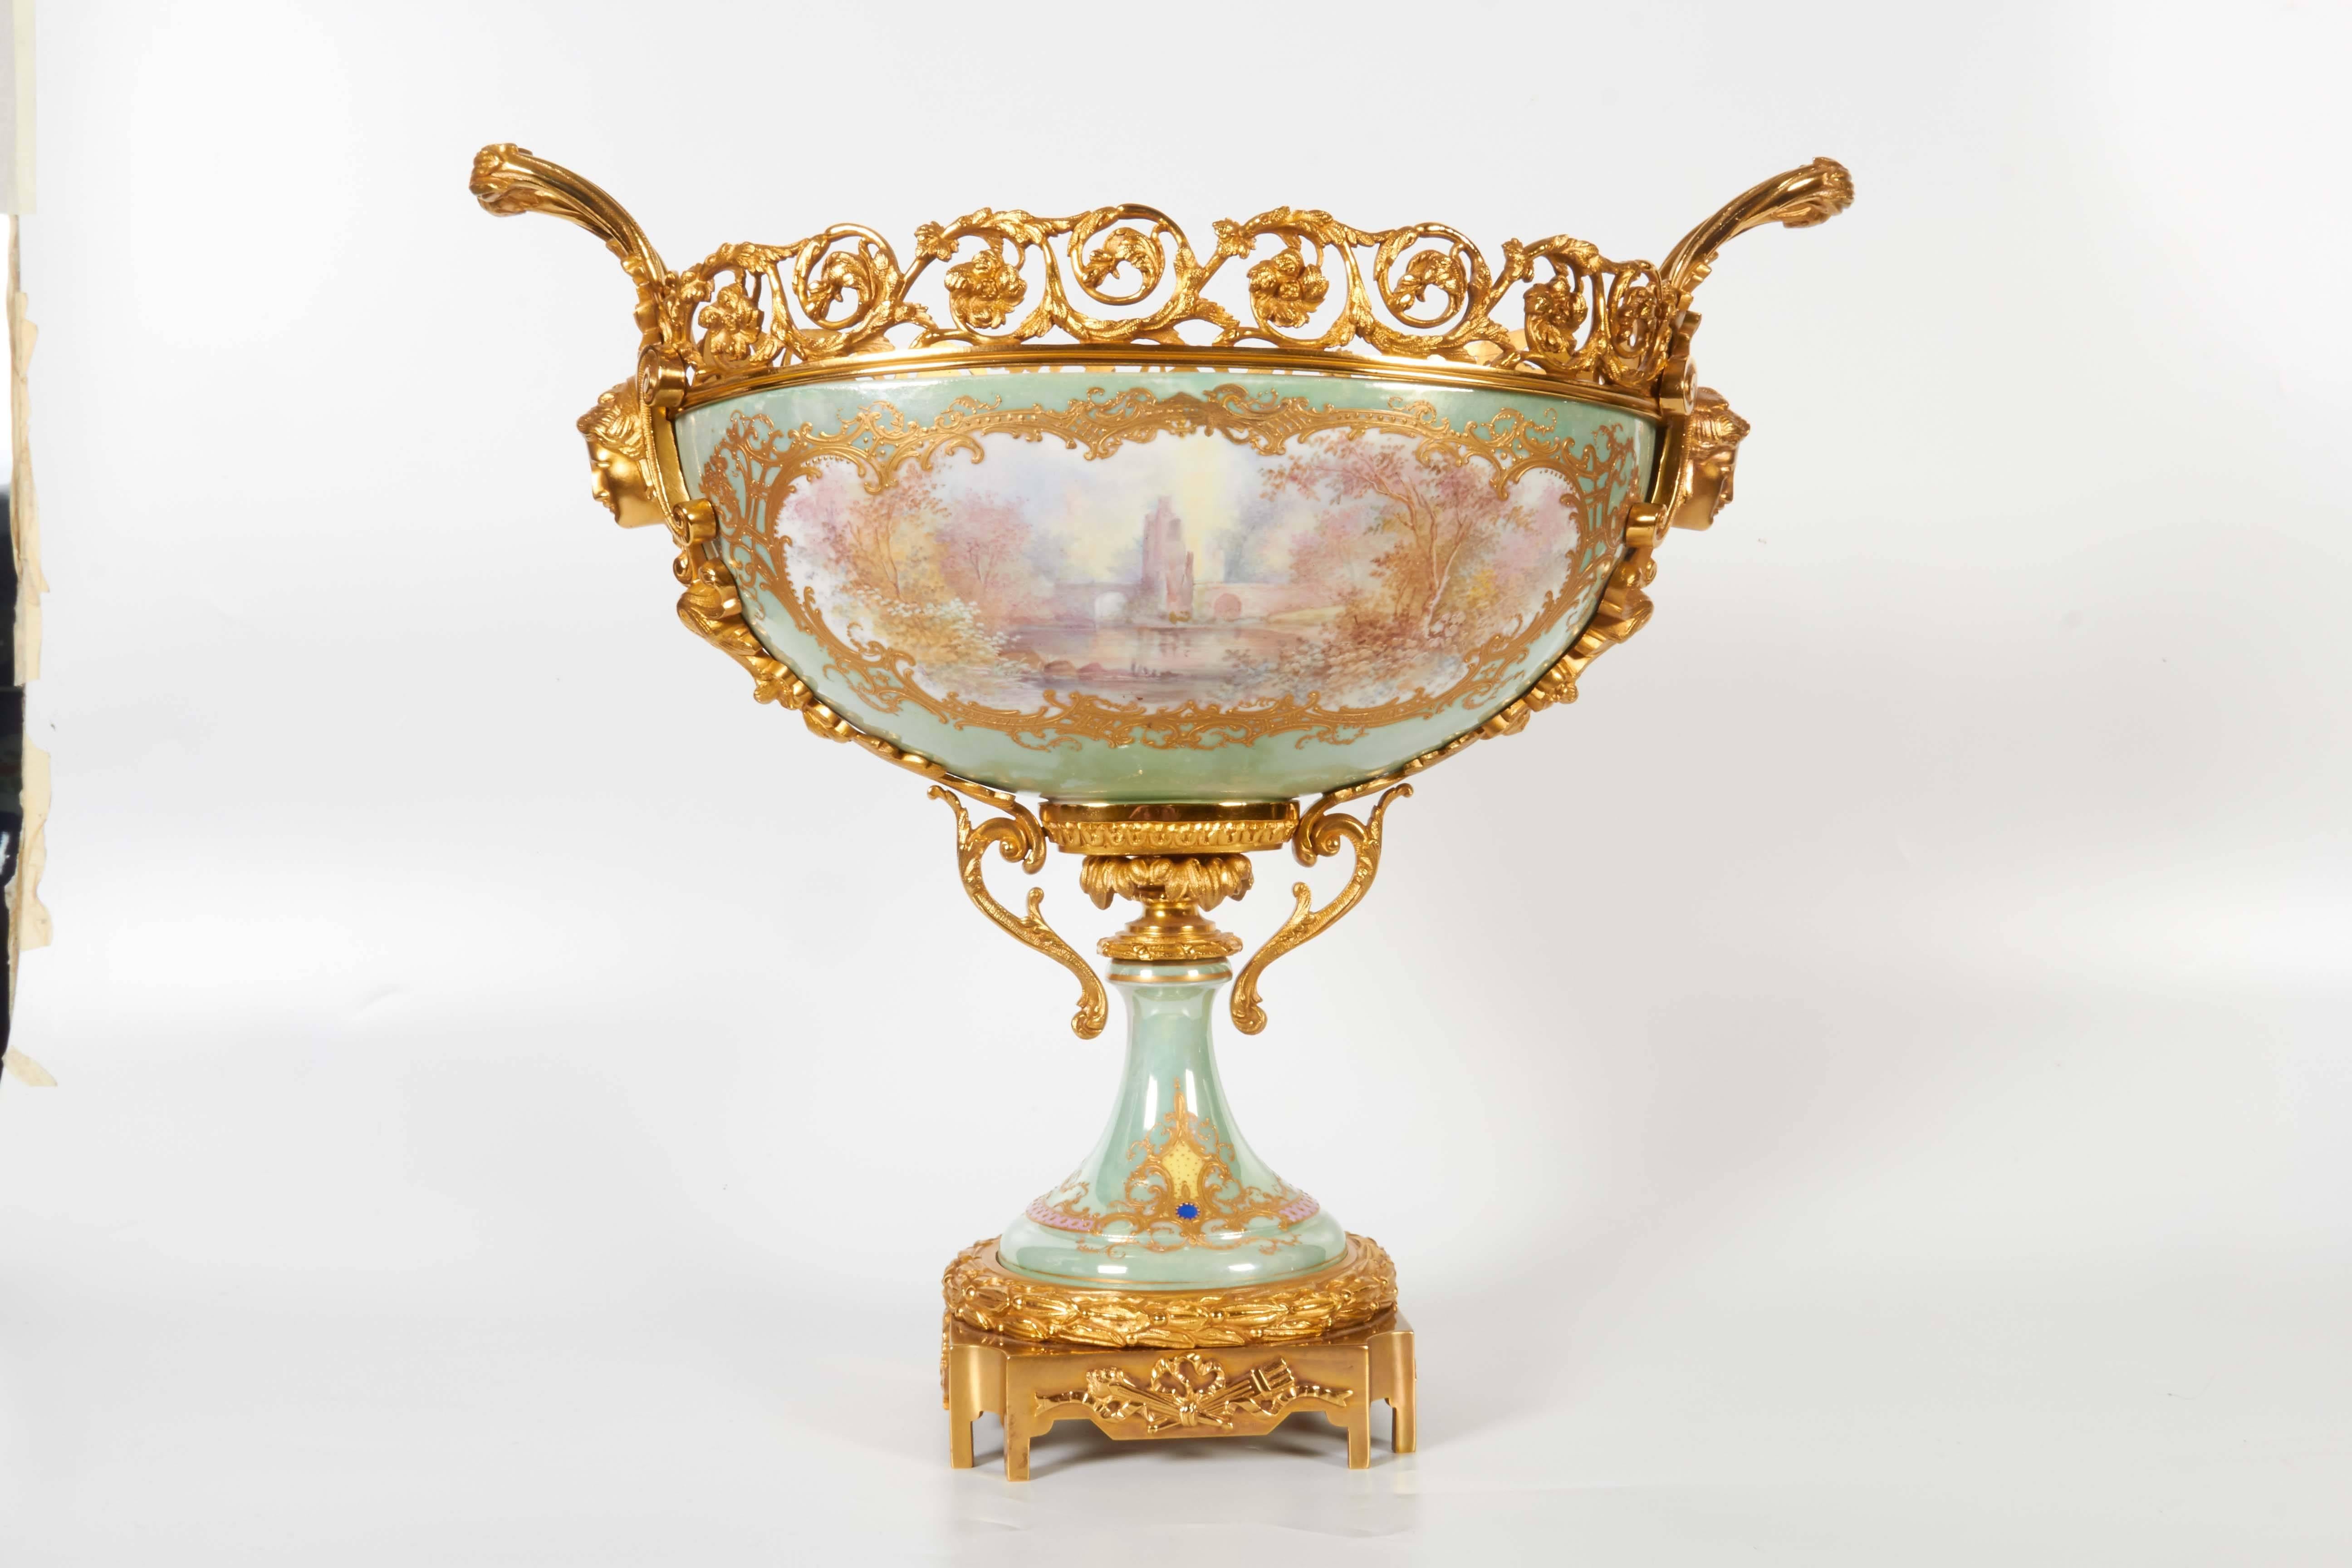 French Sèvres Porcelain & Ormolu-Mounted Hand-Painted Oval Centerpiece/Jardenier For Sale 1